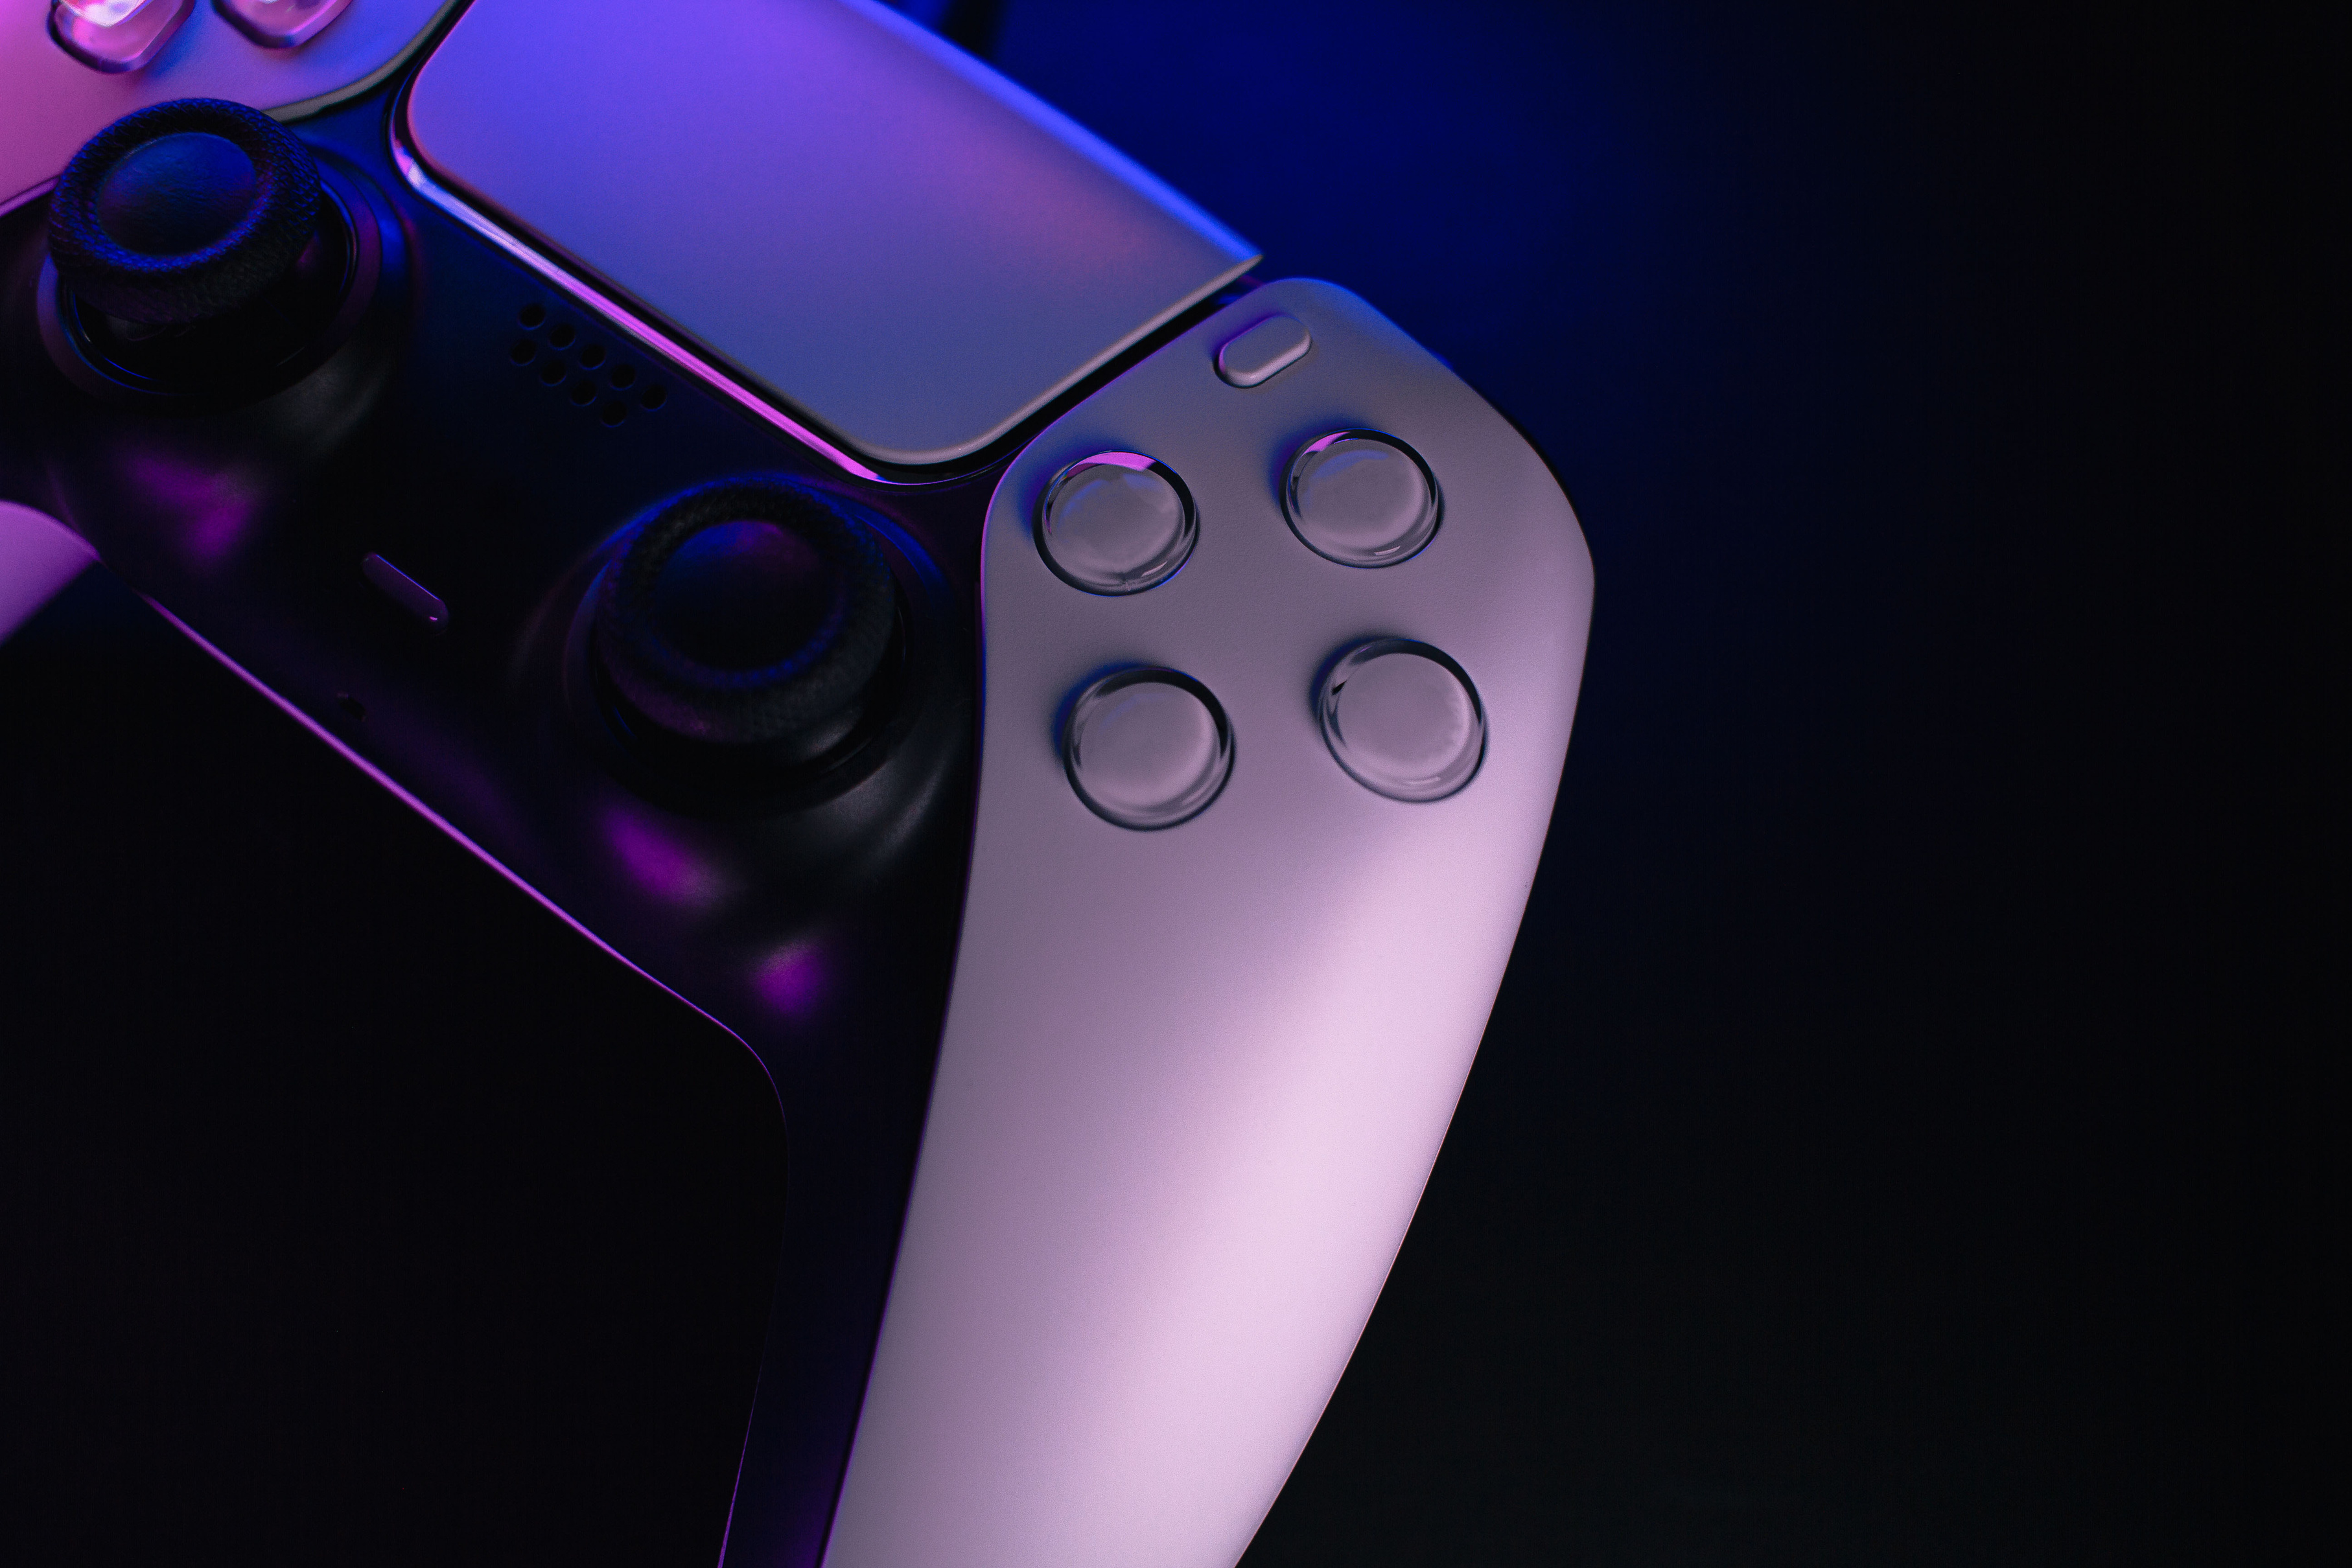 Next gen game controller with color lights.